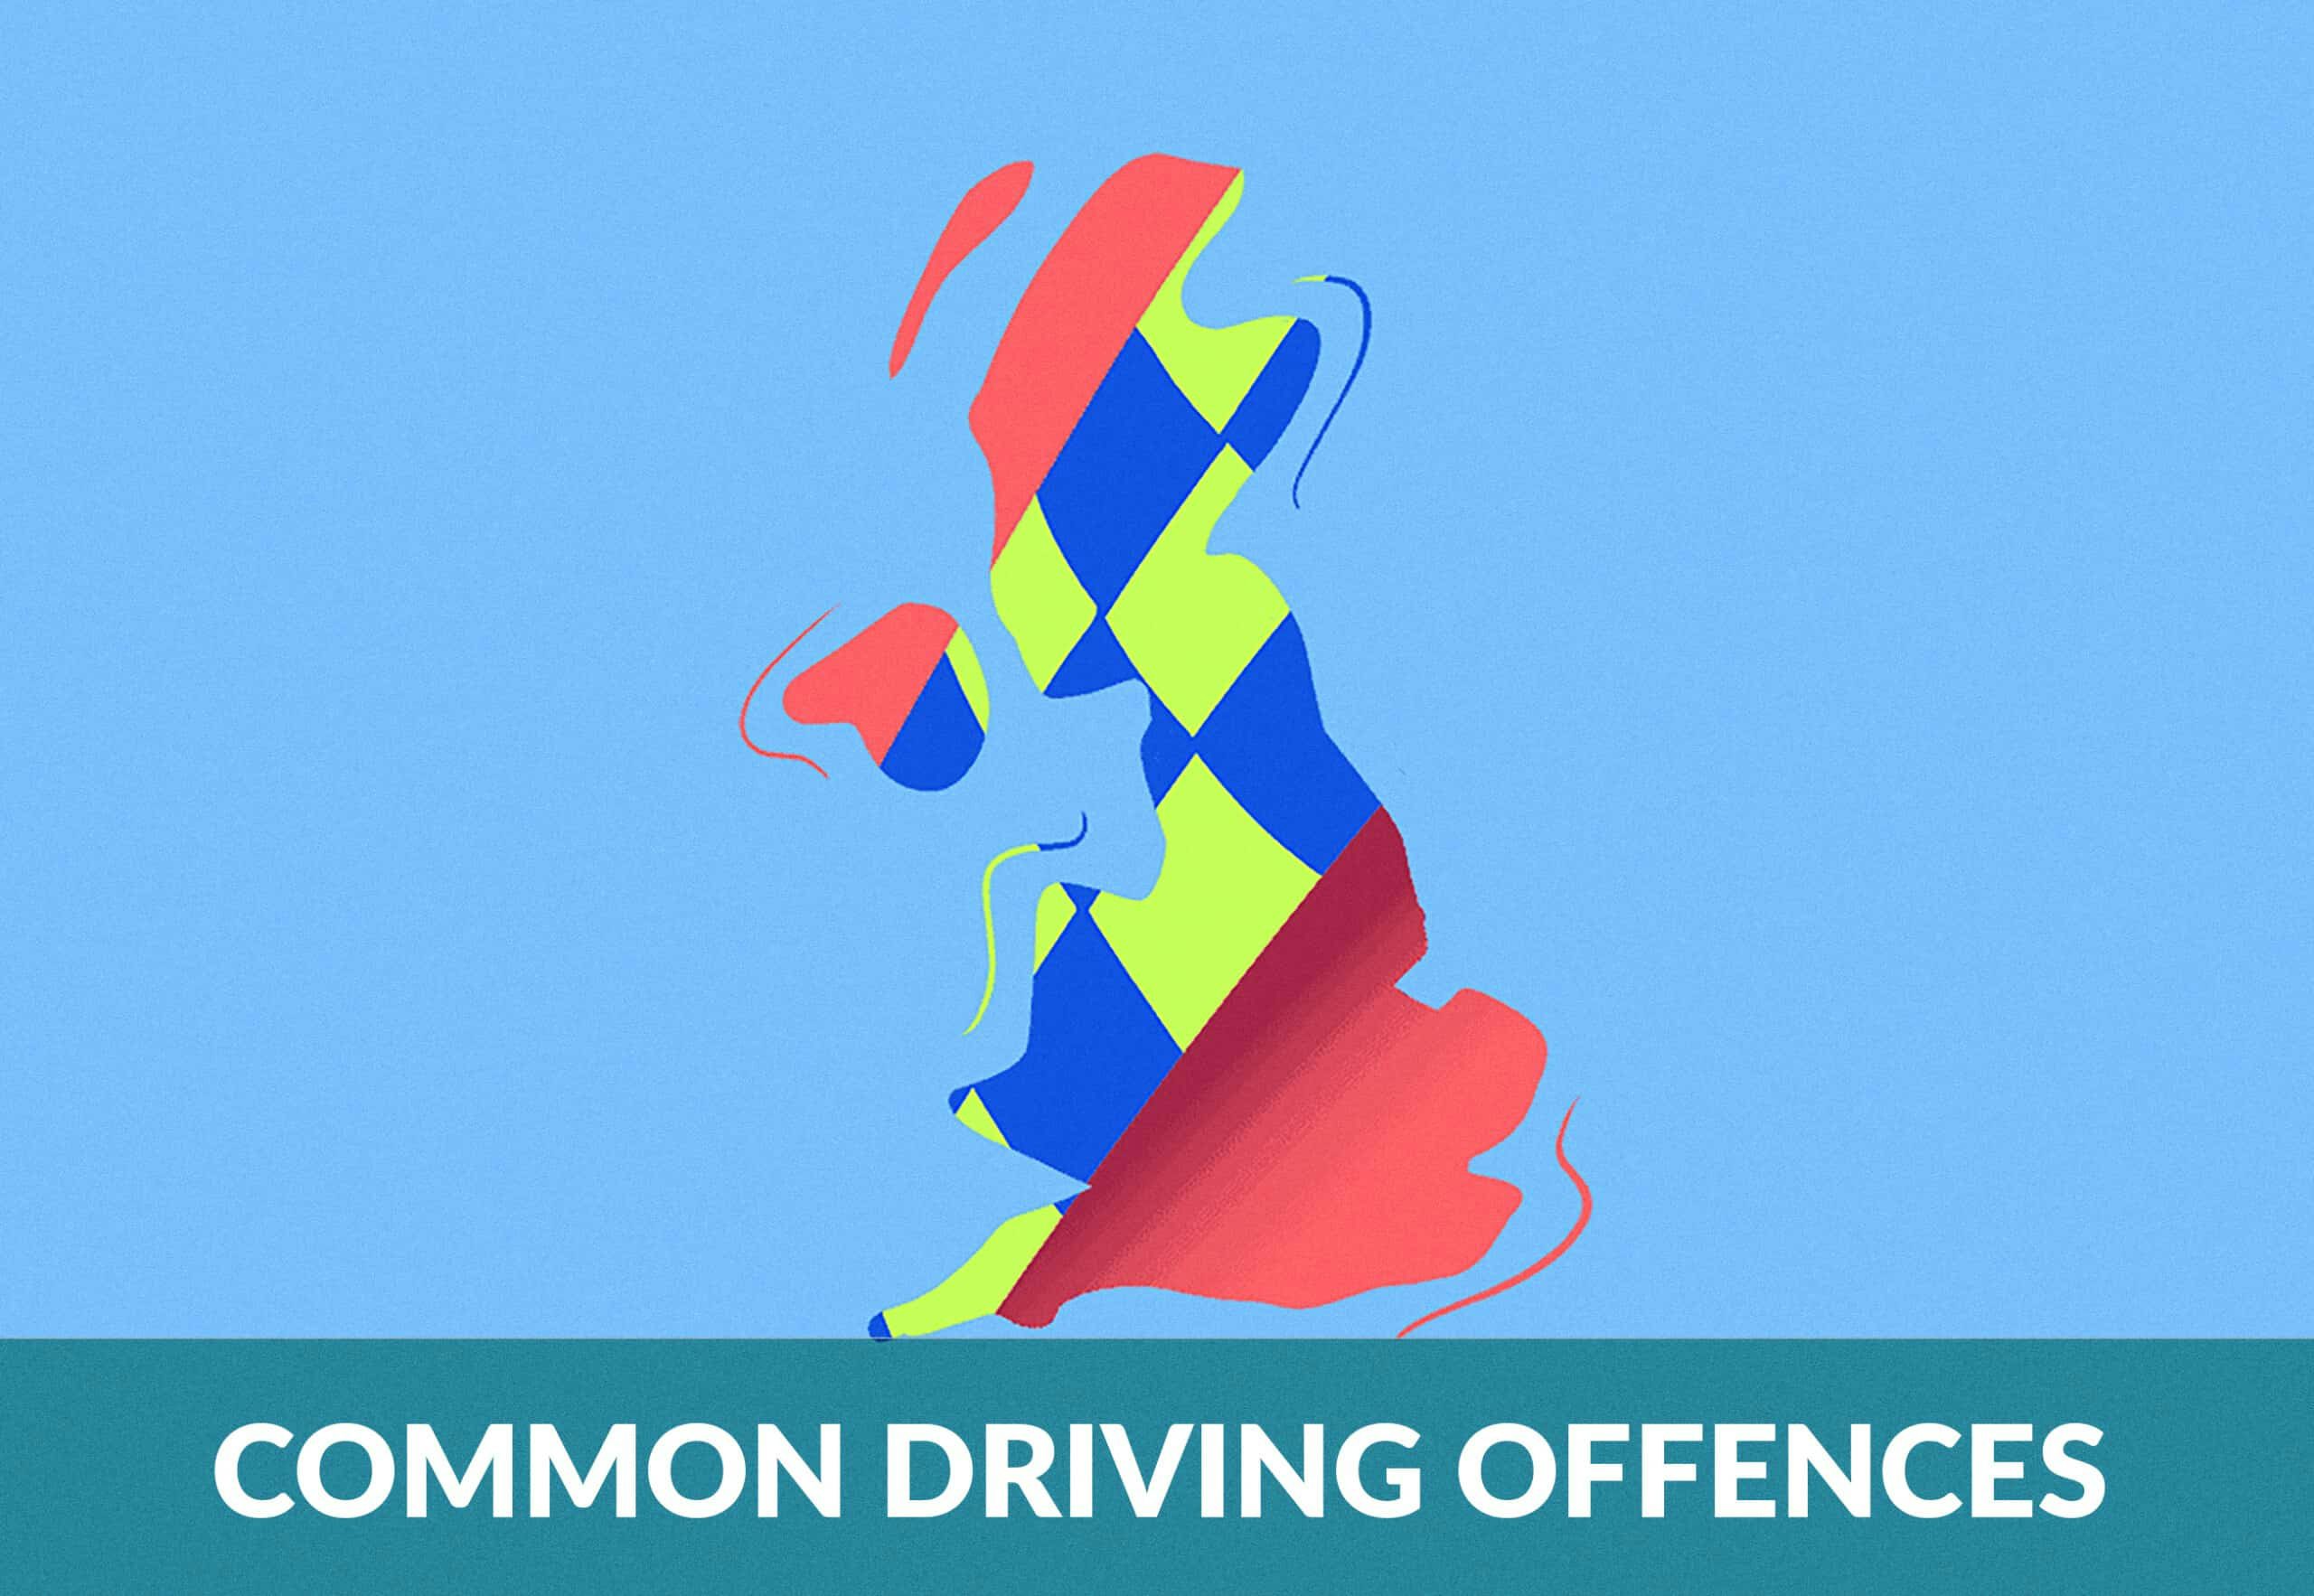 Common driving offences